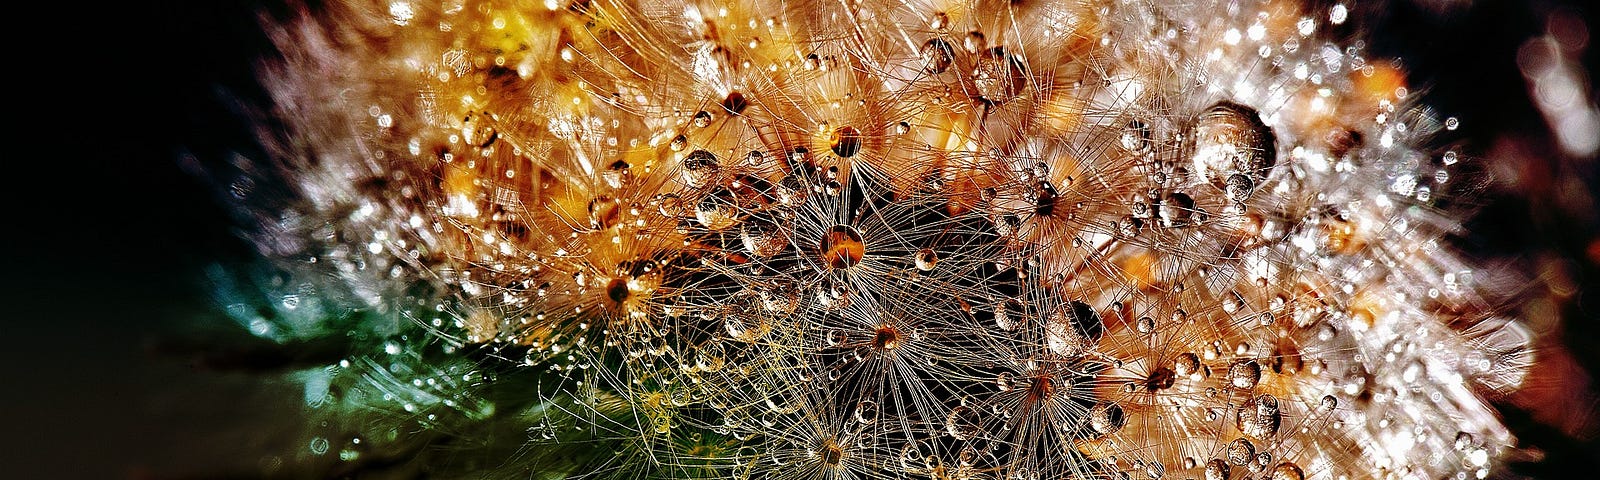 A close up of a dandelion gone to seed with dew droplets all over the seeds.